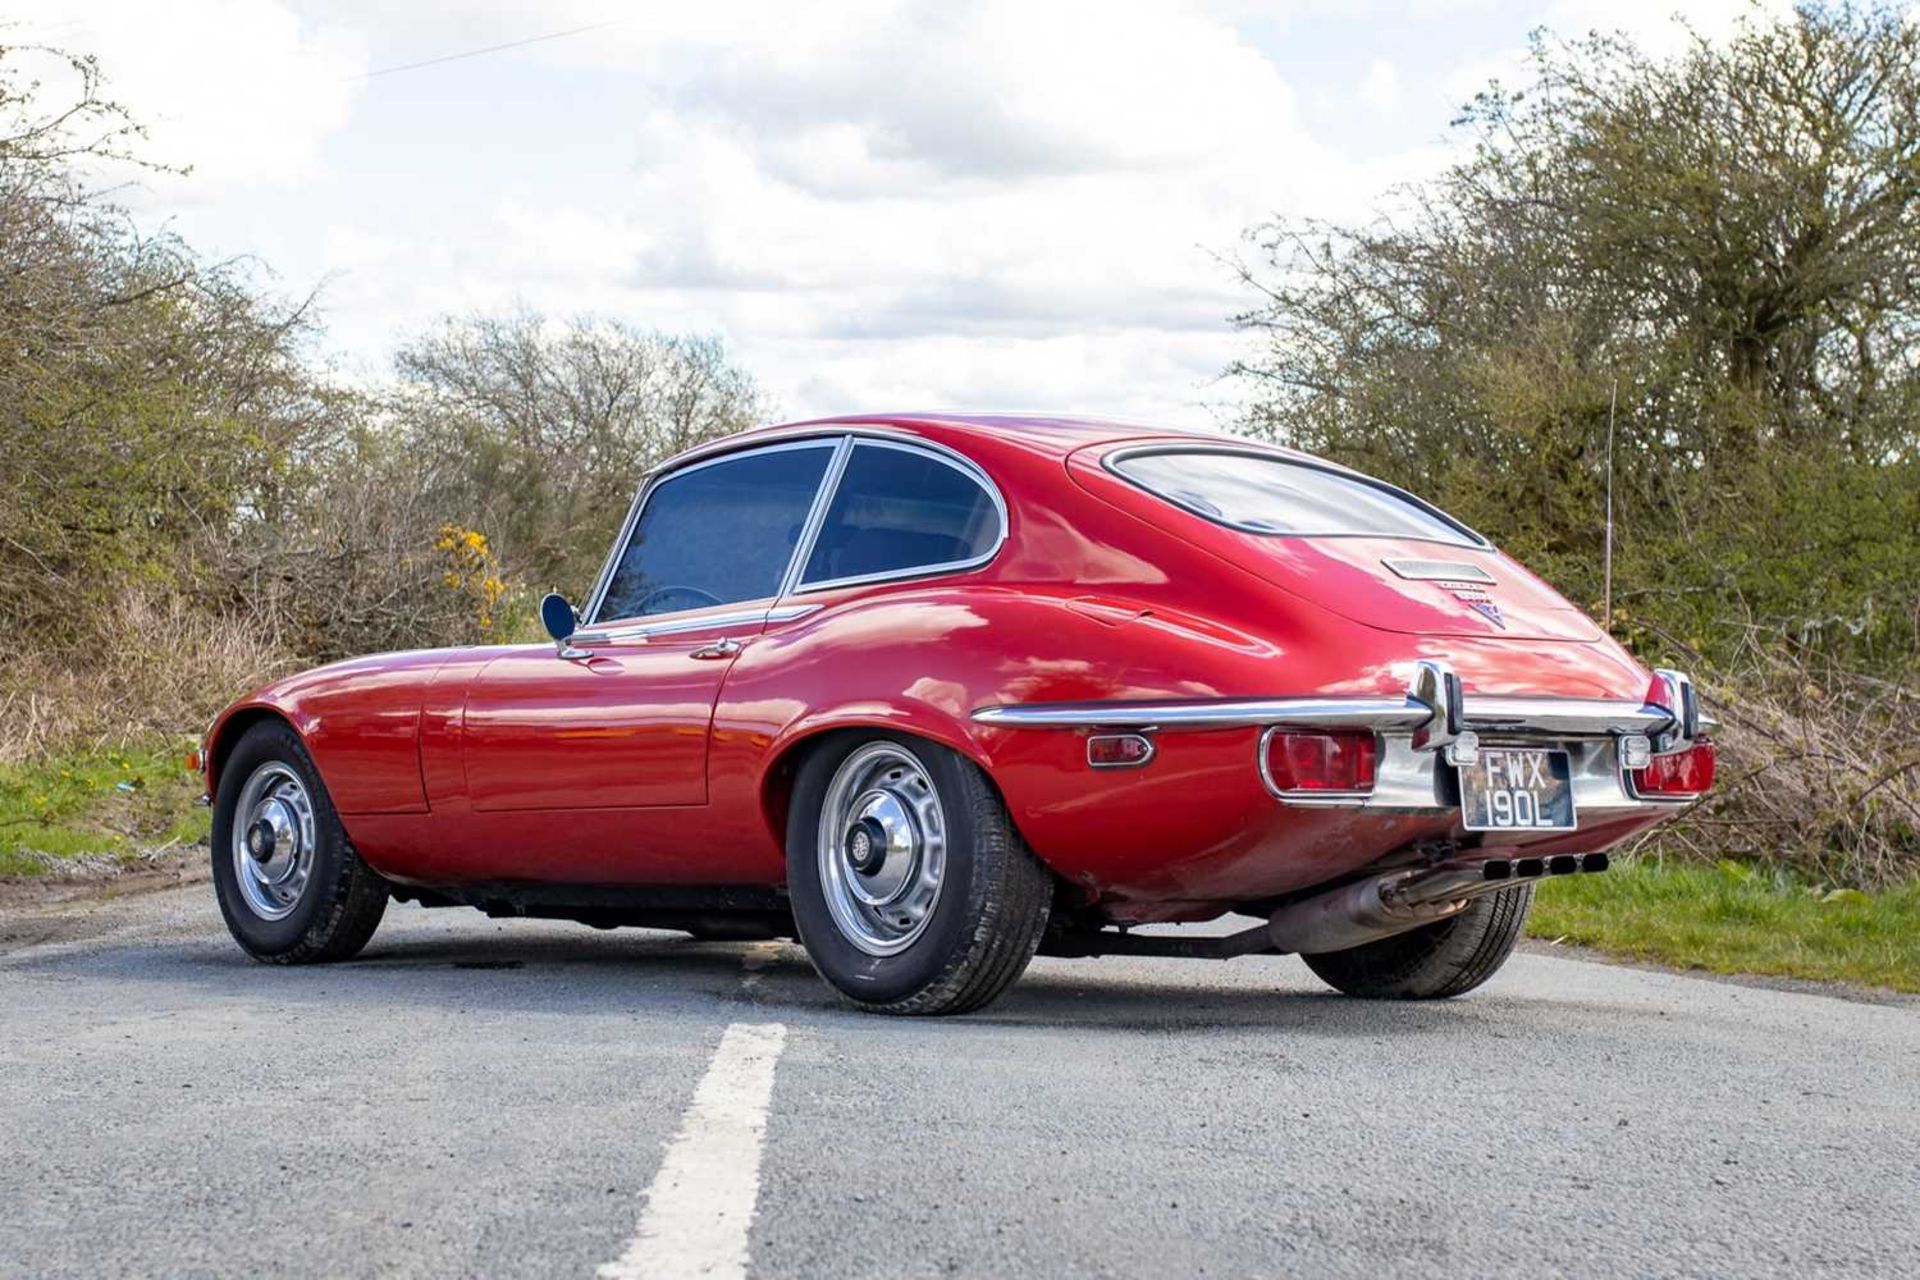 1973 Jaguar E-Type Coupe 5.3 V12 Three owners from new - Image 12 of 79